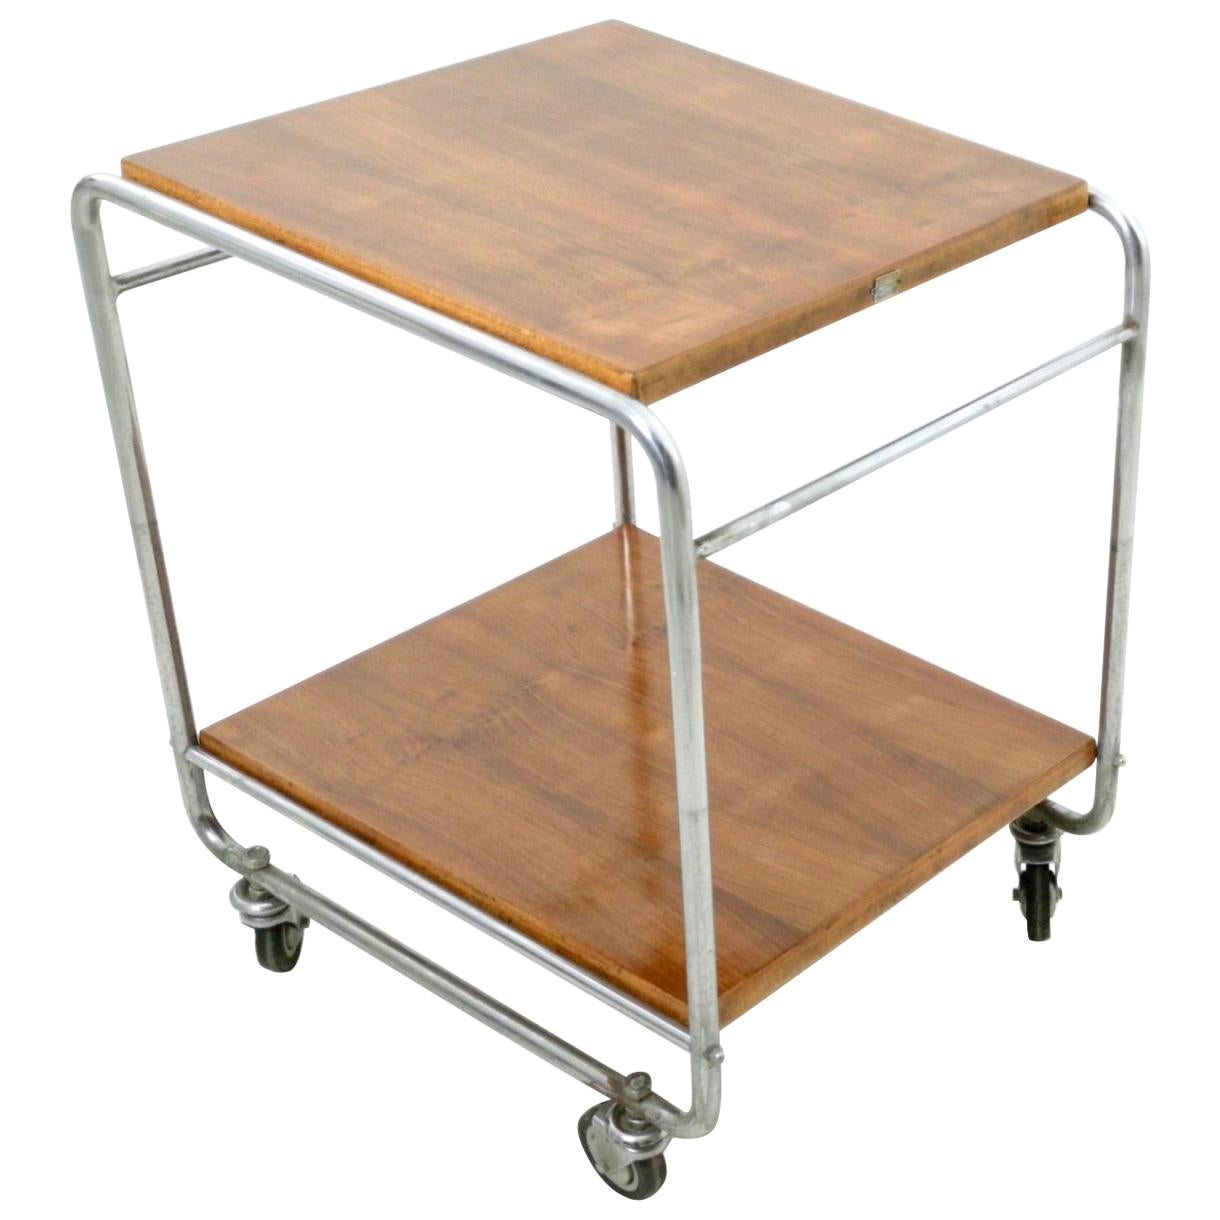 Walnut and Nickel-Plated Metal Serving Cart Produced by Cova, Italy, 1940s